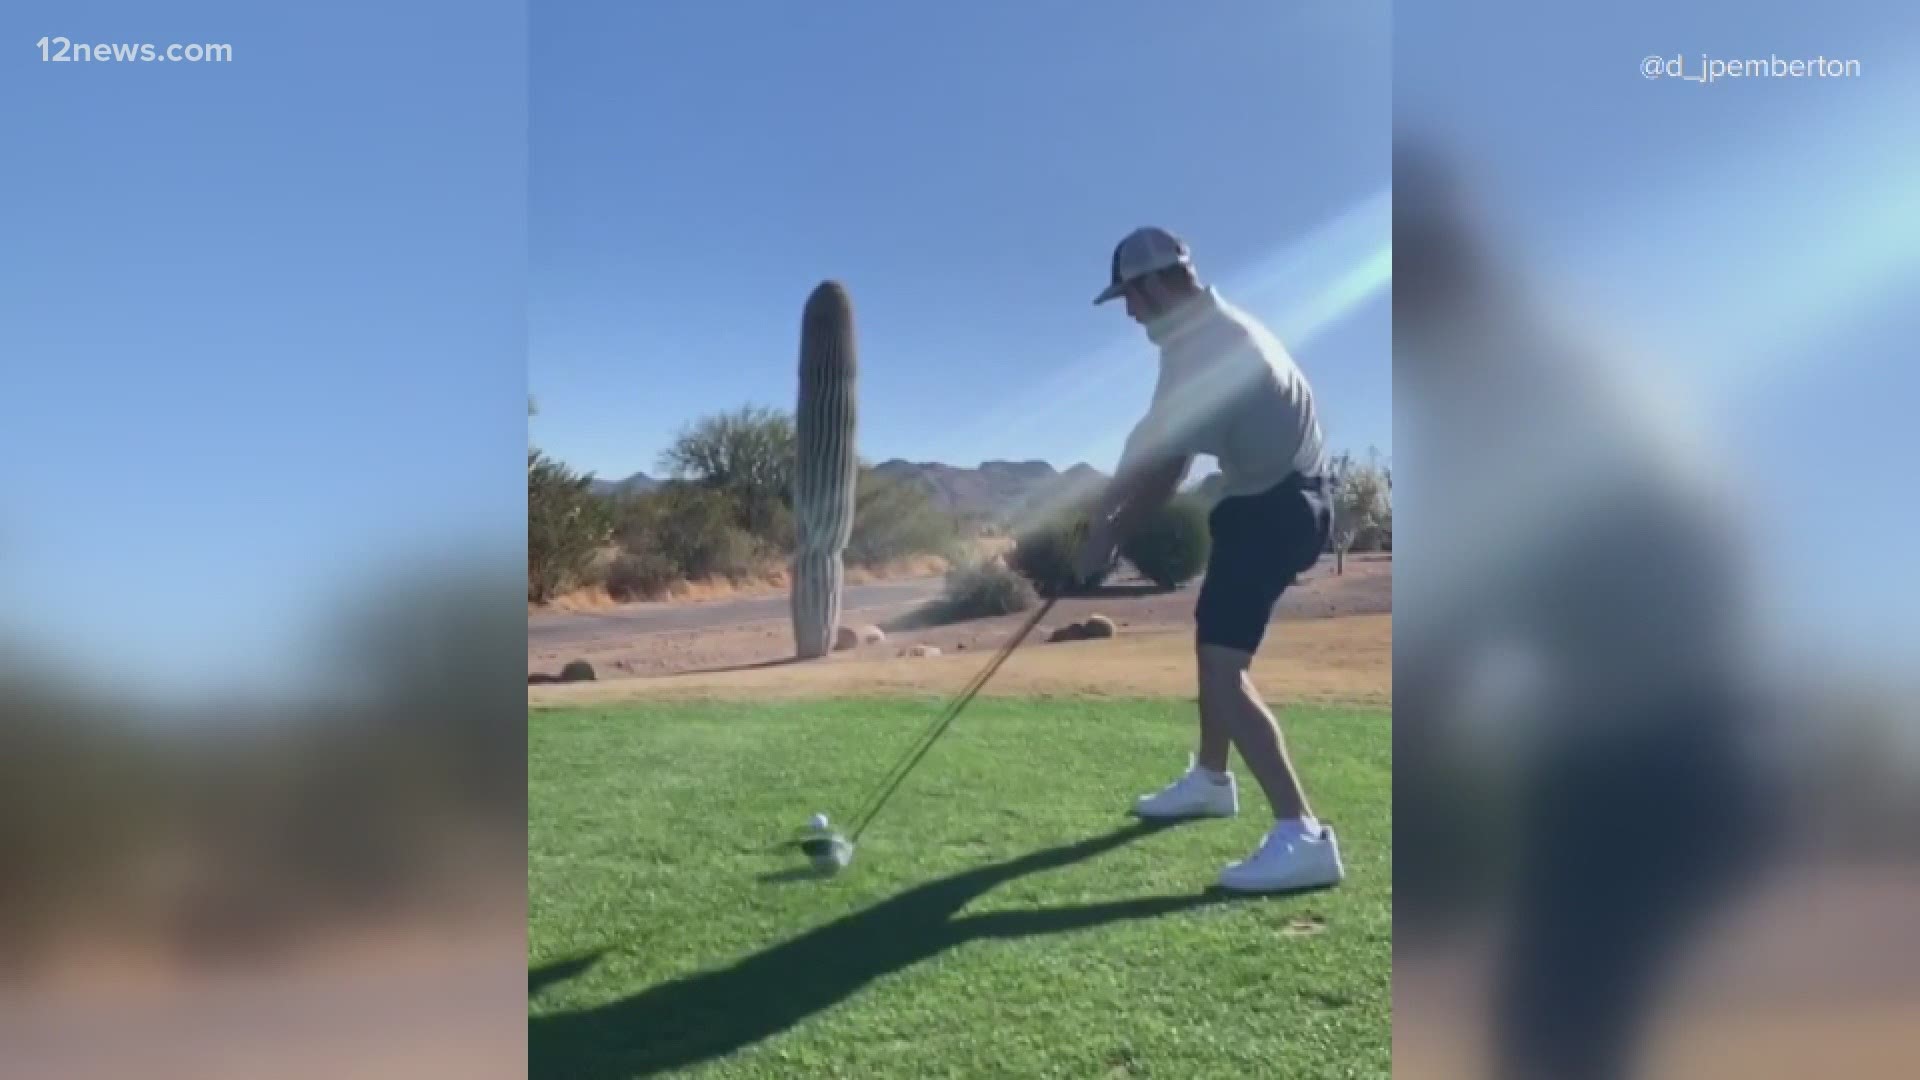 In a video that’s racked up hundreds of thousands of views, a group of golfers was seen cheering while one teed off and damaged an Arizona cactus.